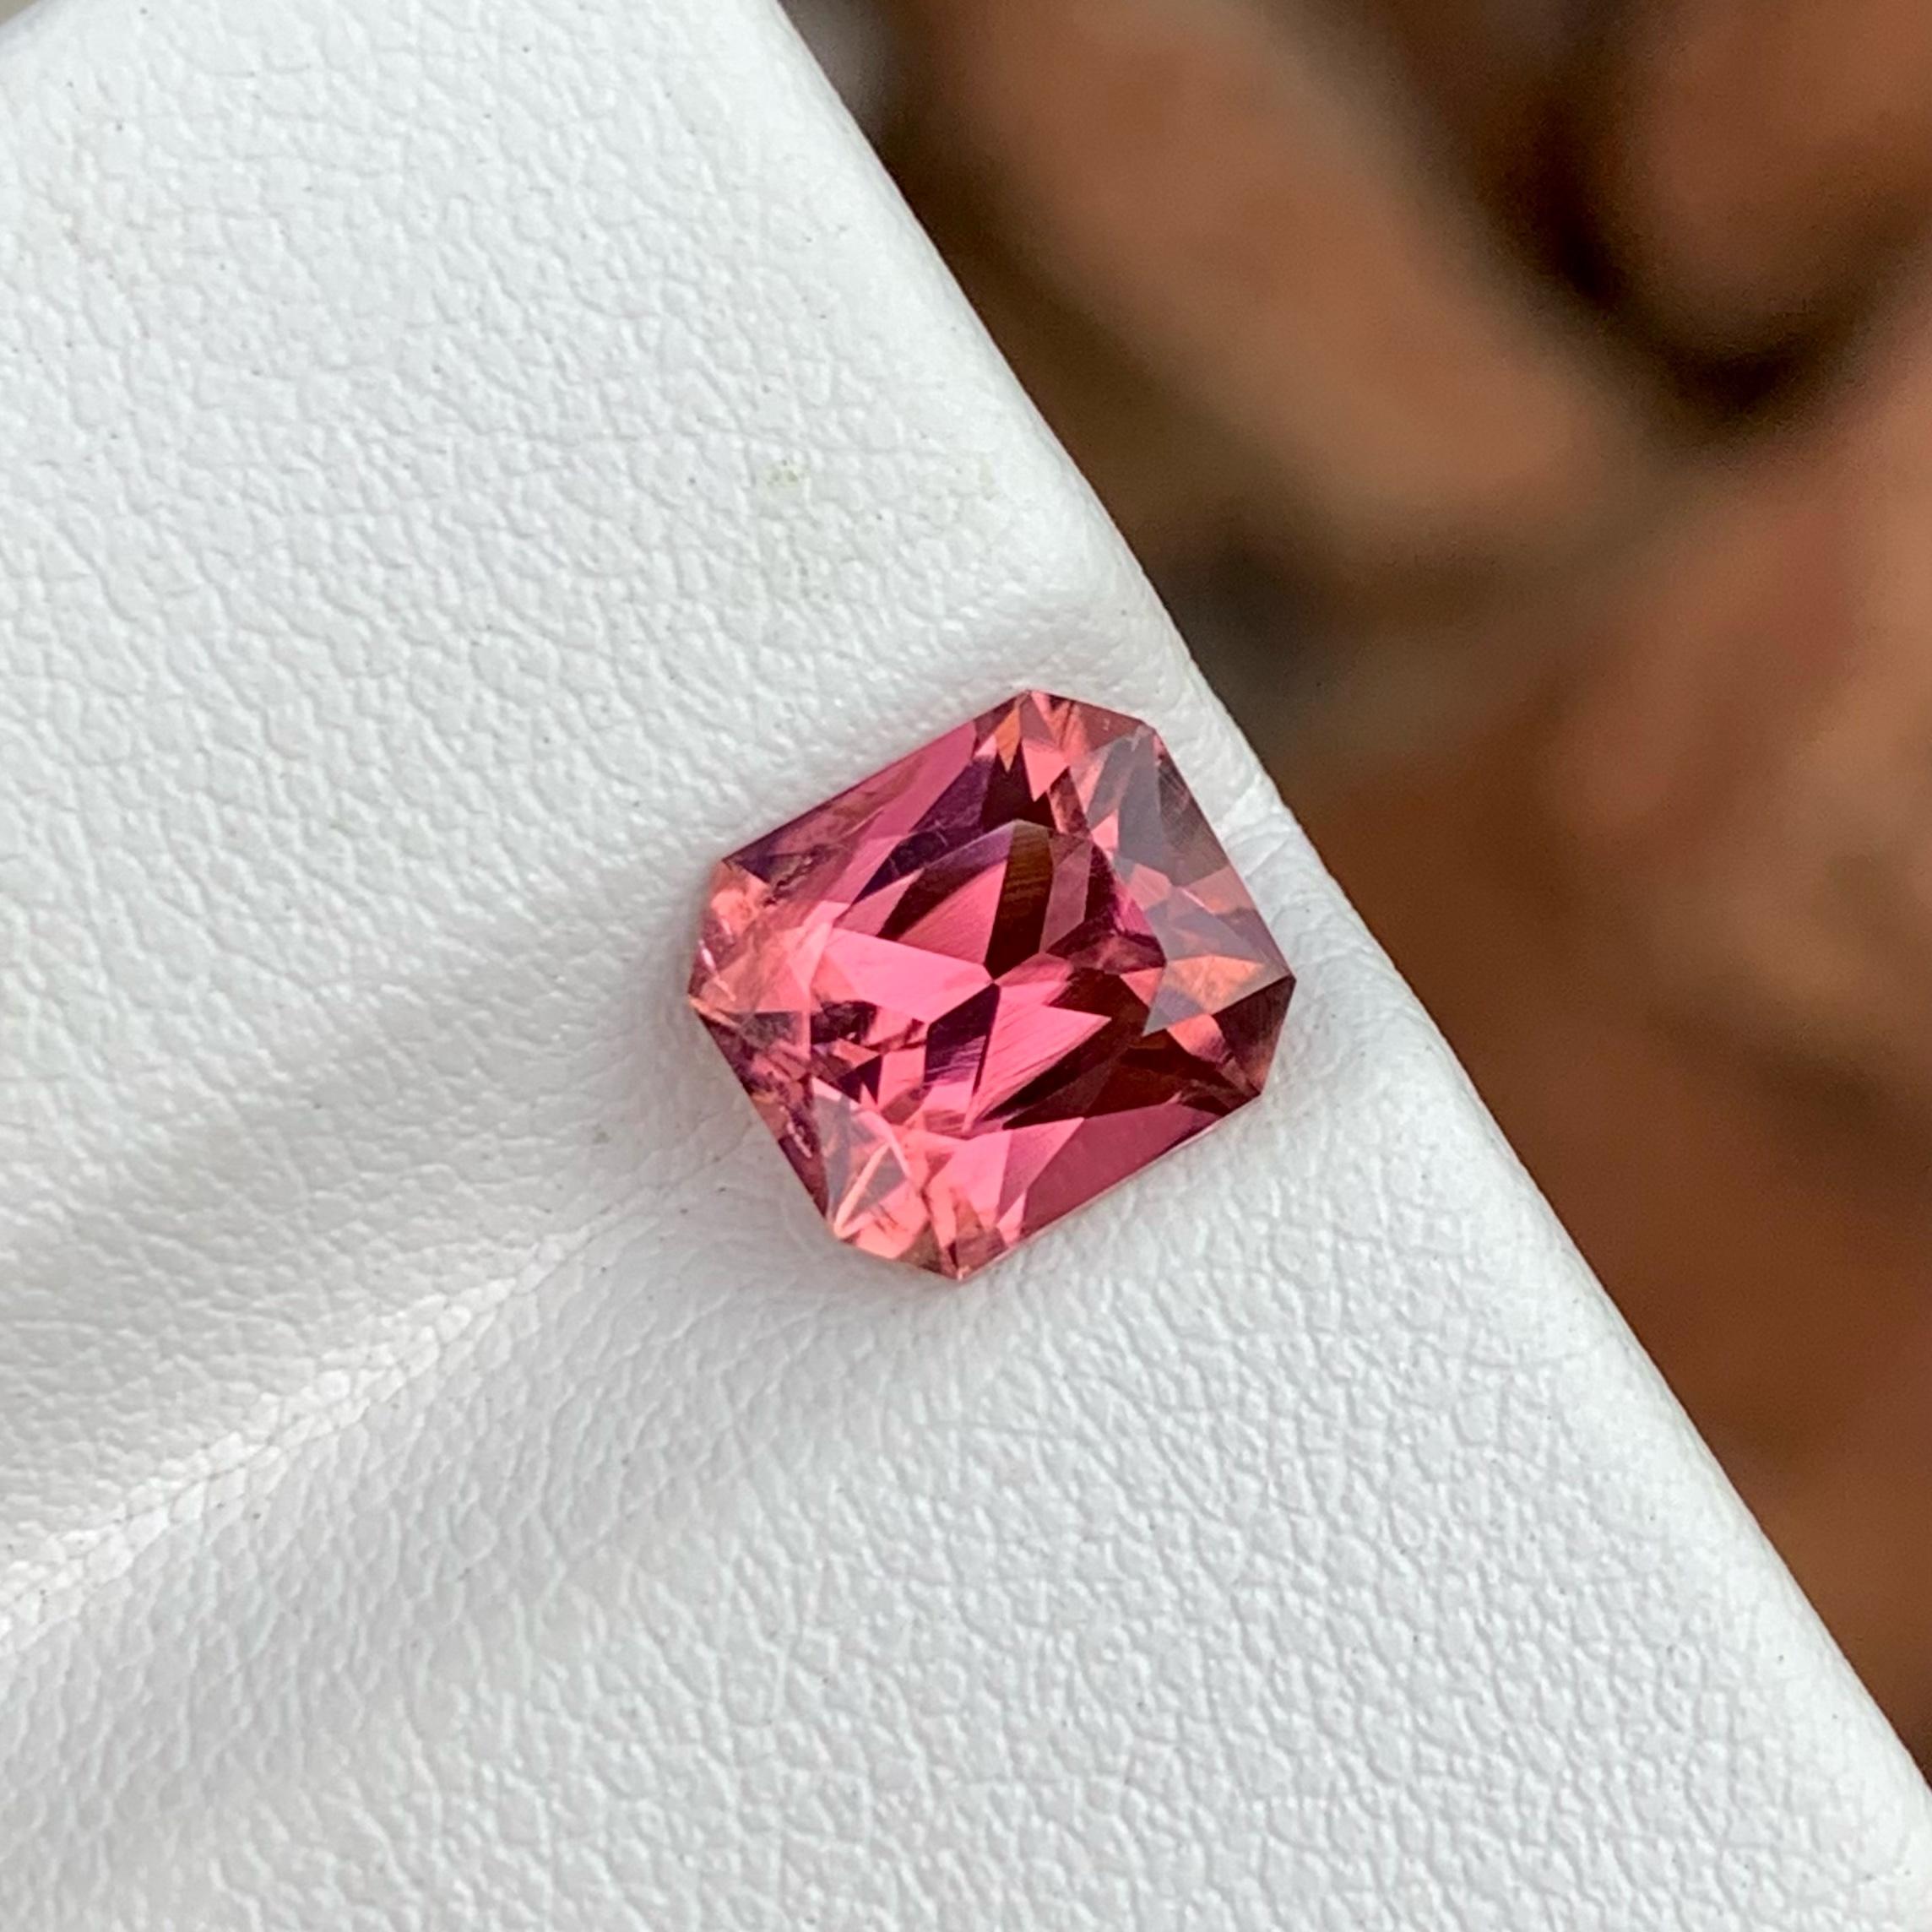 Flamingo Pink Tourmaline Stone for ring, available for sale at wholesale price natural high quality 2.30 Carats Octagon Shape tourmaline From Afghanistan.

Product Information.
GEMSTONE TYPE:	Flamingo Pink Tourmaline: Stone
WEIGHT:	2.30